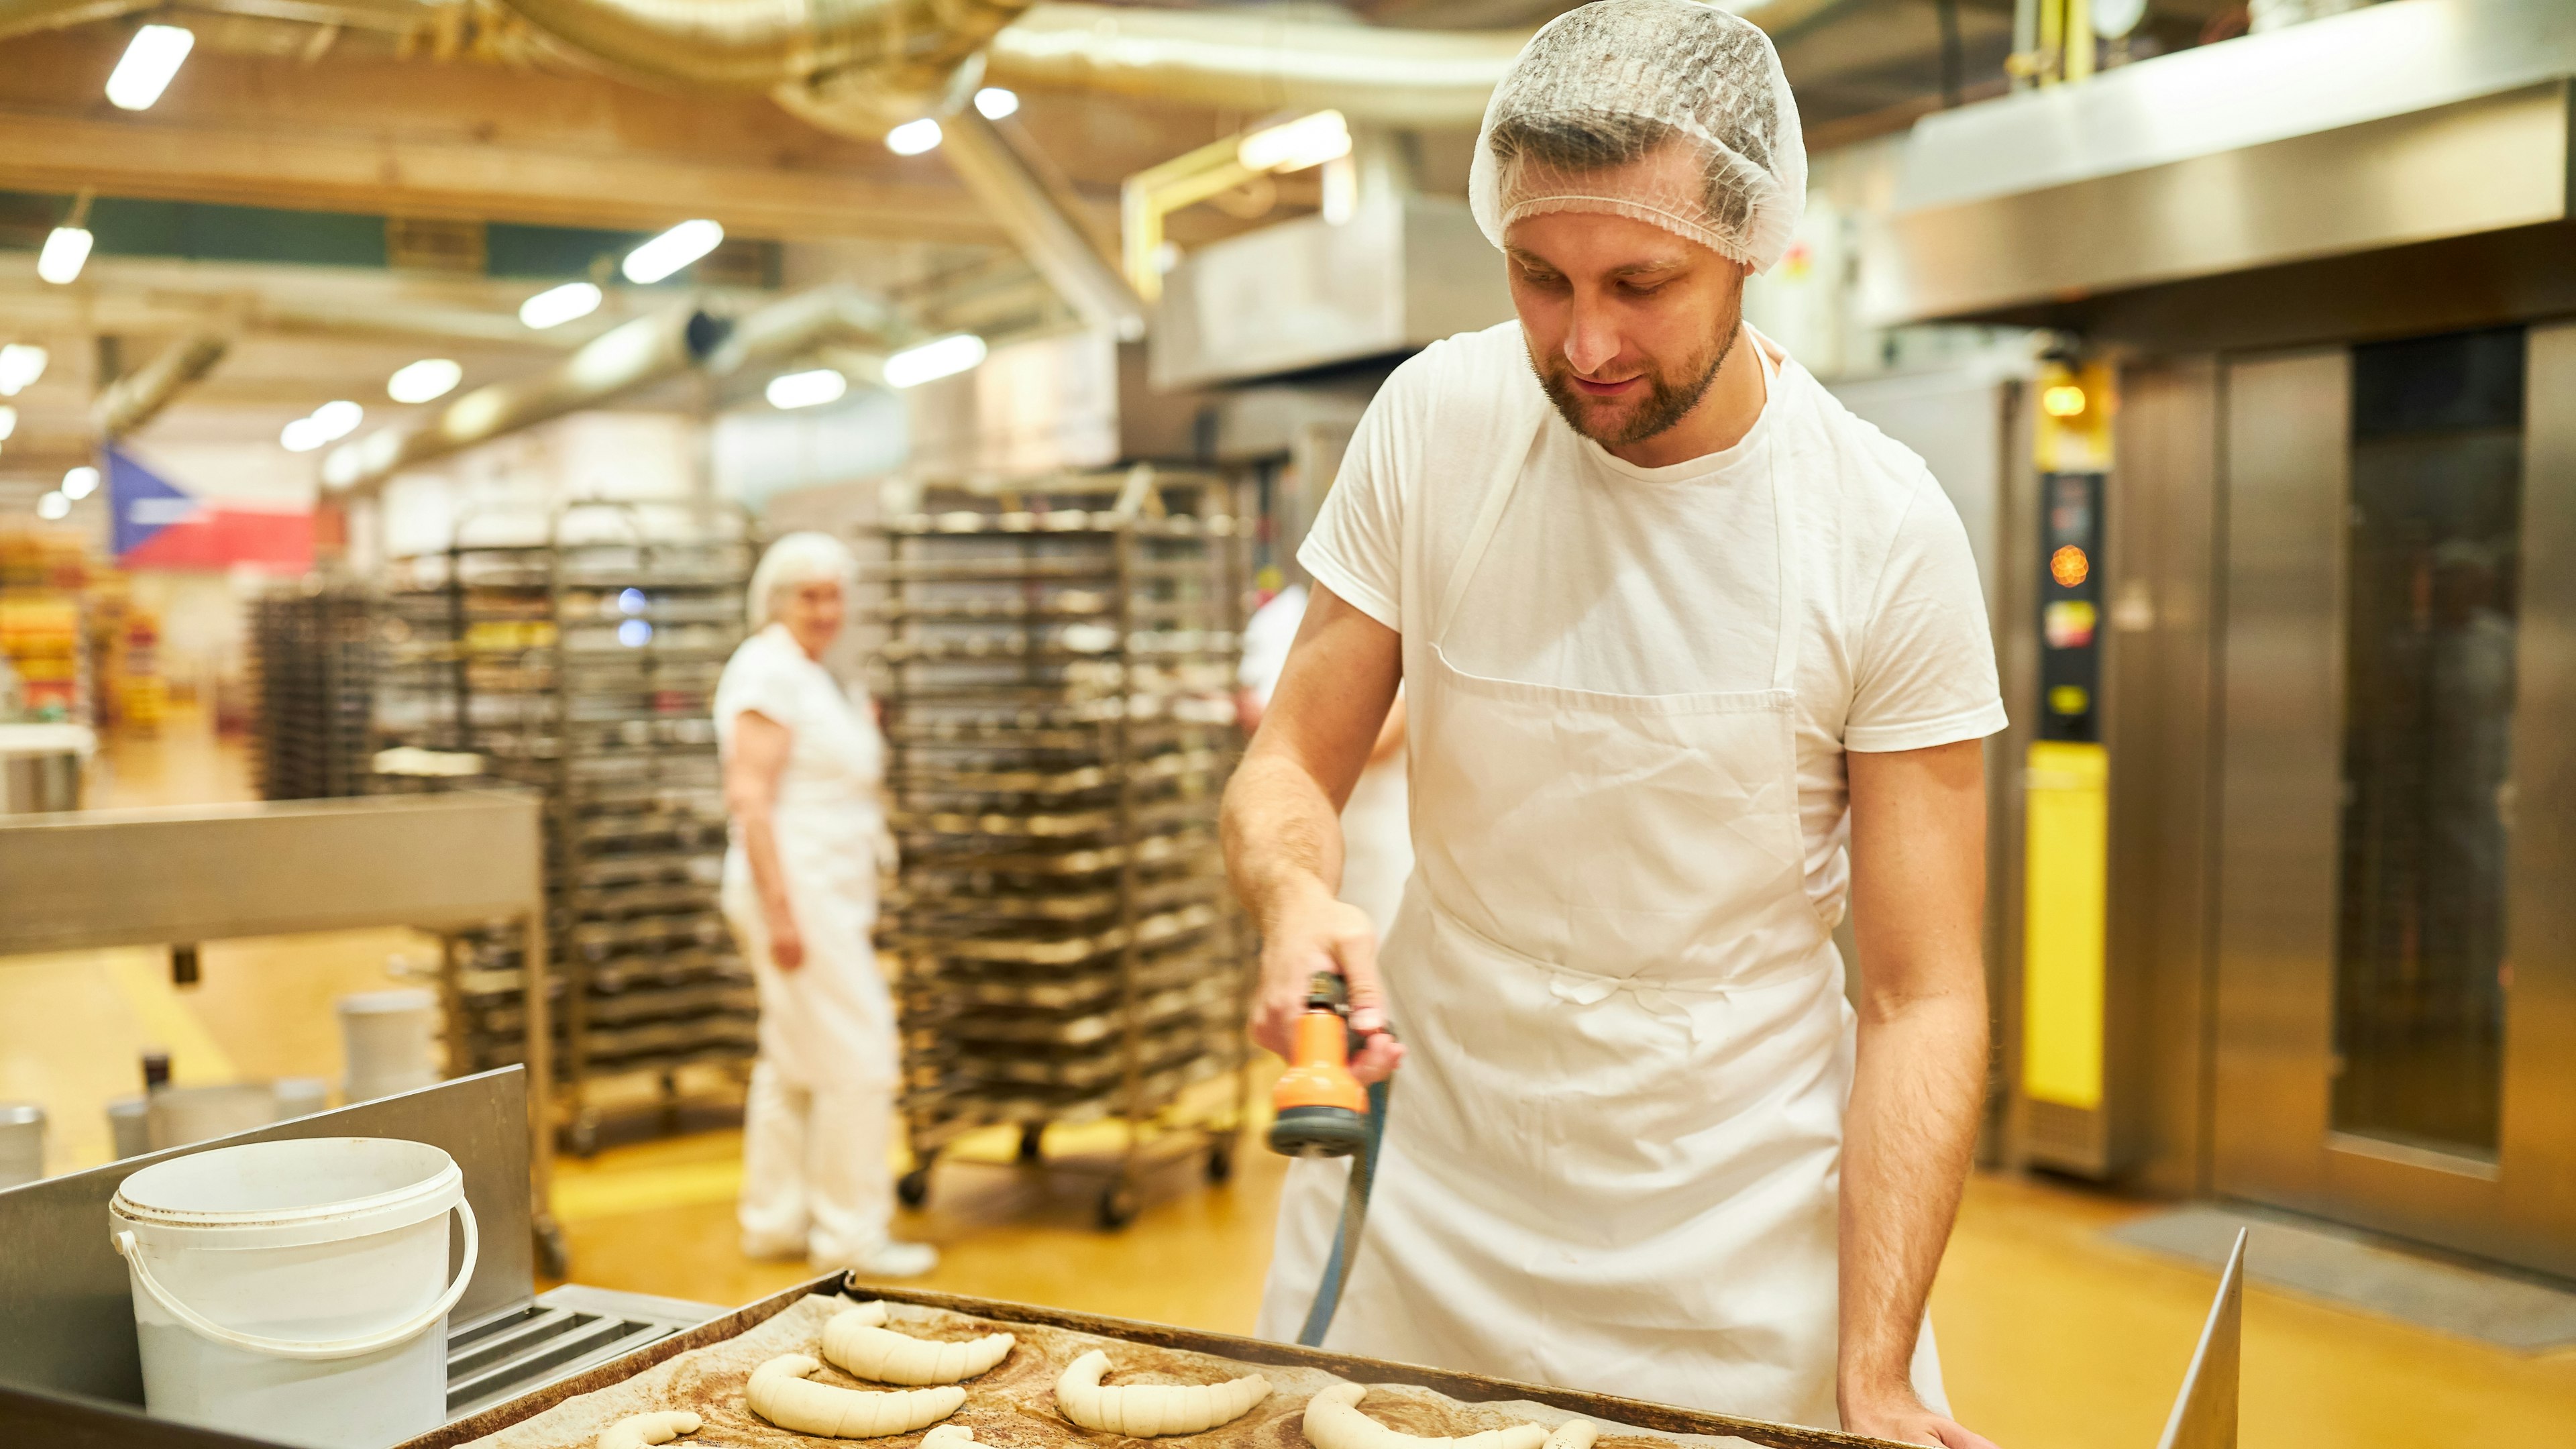 Image of man working in bakery making croissants.